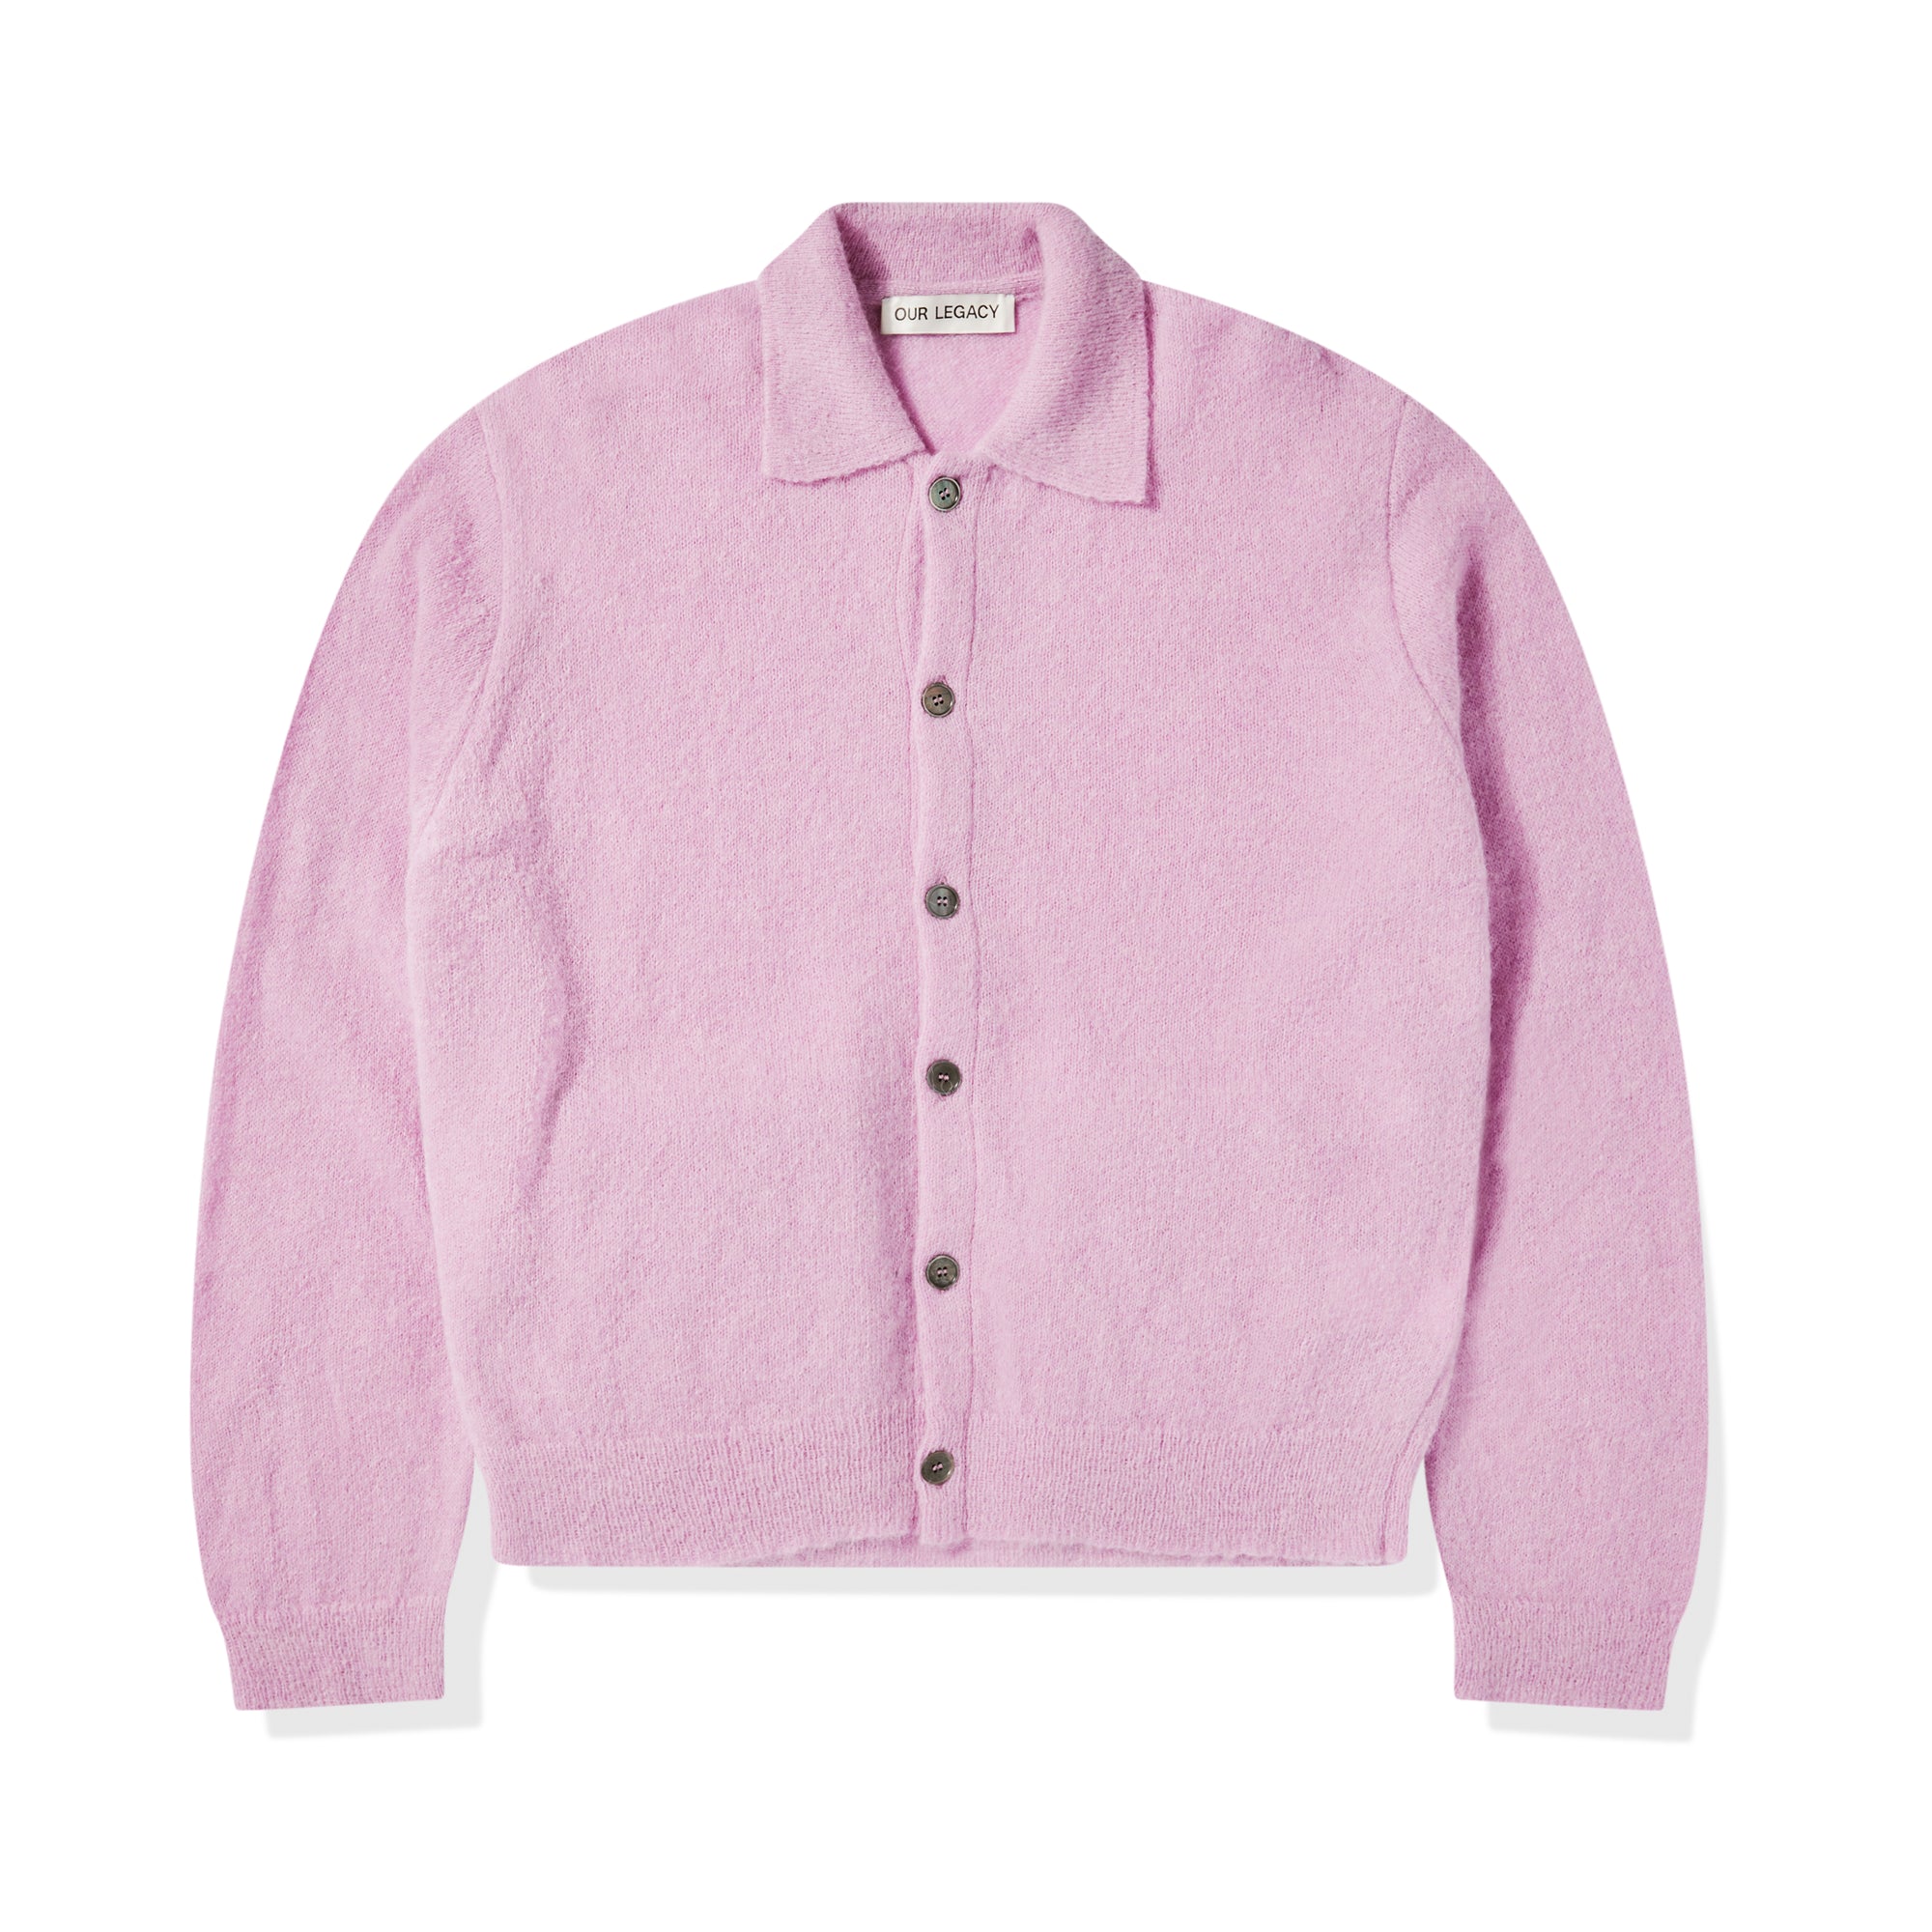 Our Legacy - Men’s Evening Polo - (Pink) view 1